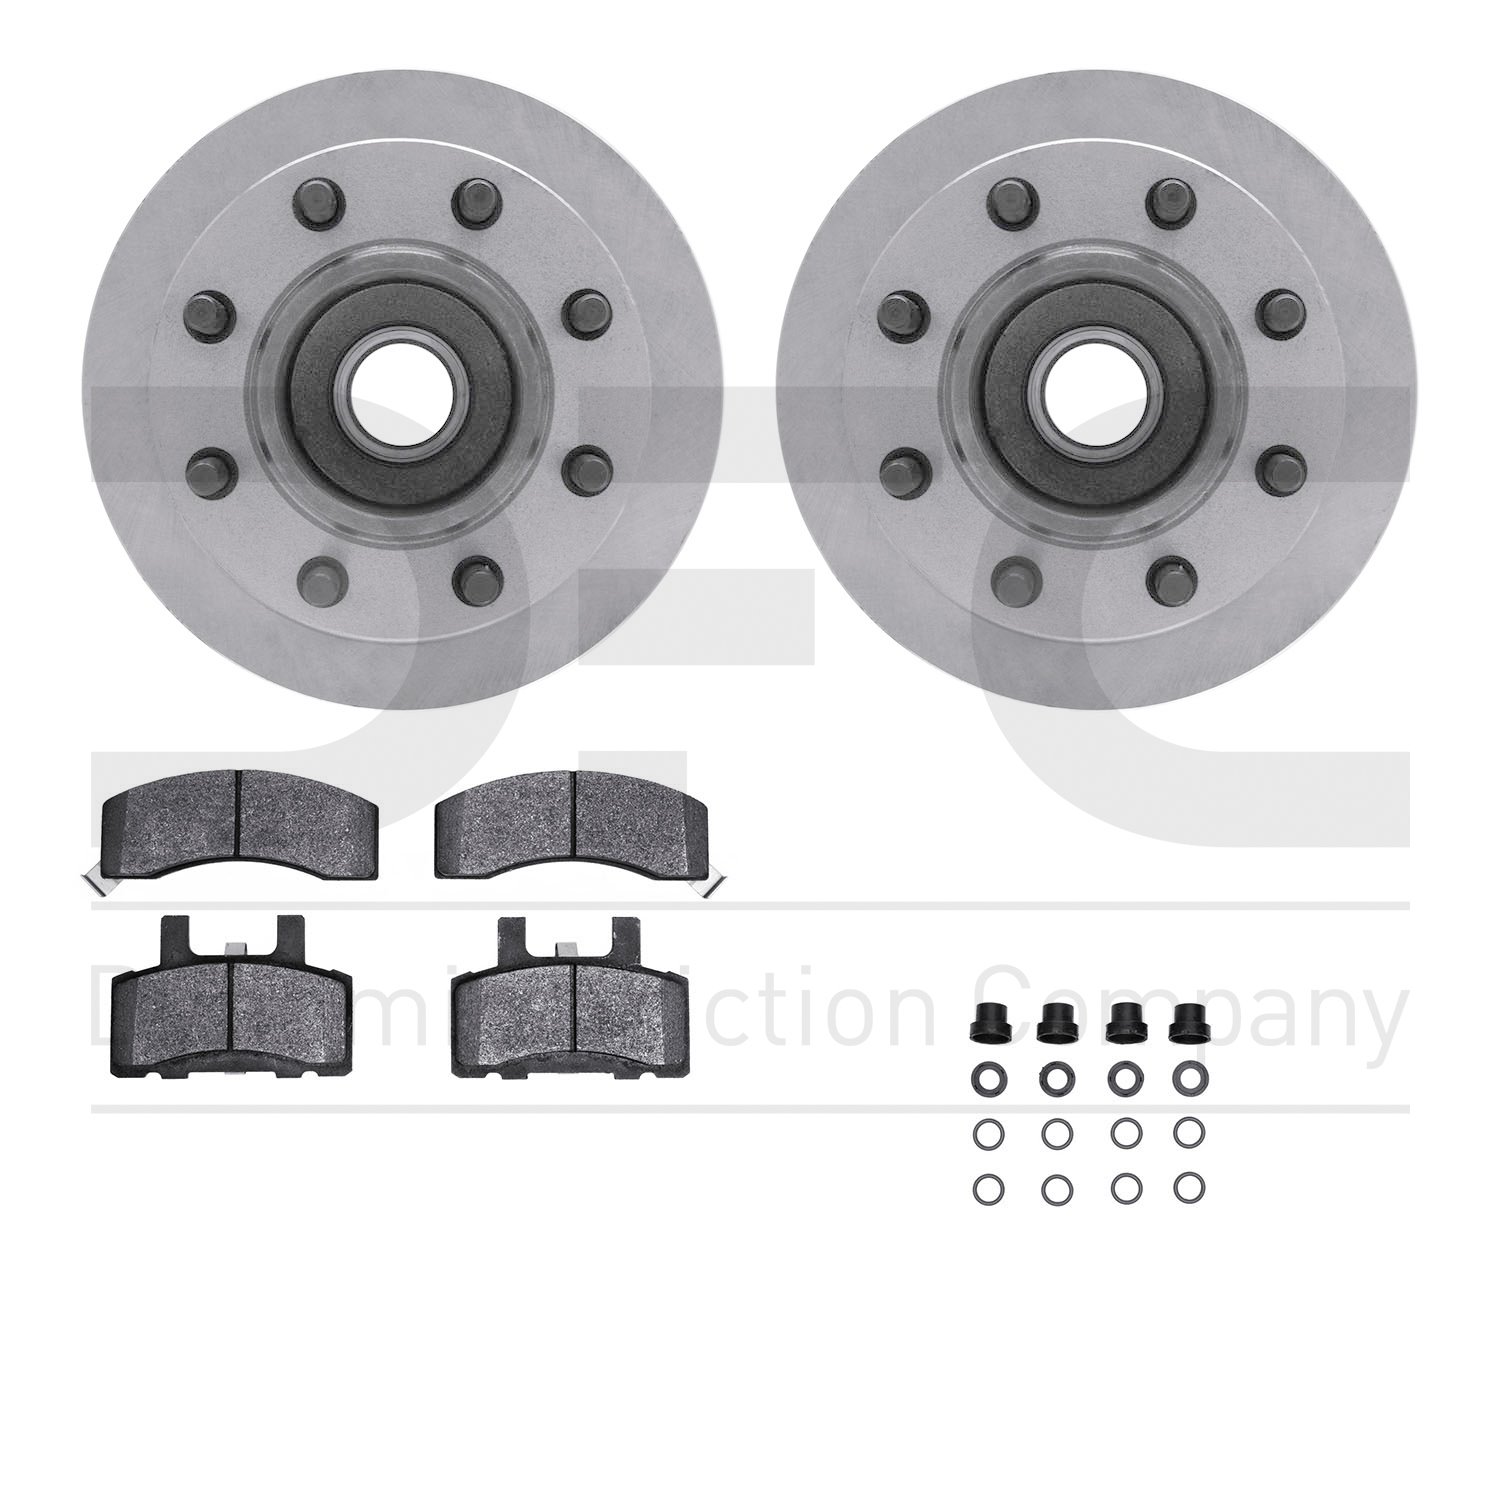 6412-48019 Brake Rotors with Ultimate-Duty Brake Pads Kit & Hardware, 1988-1989 GM, Position: Front